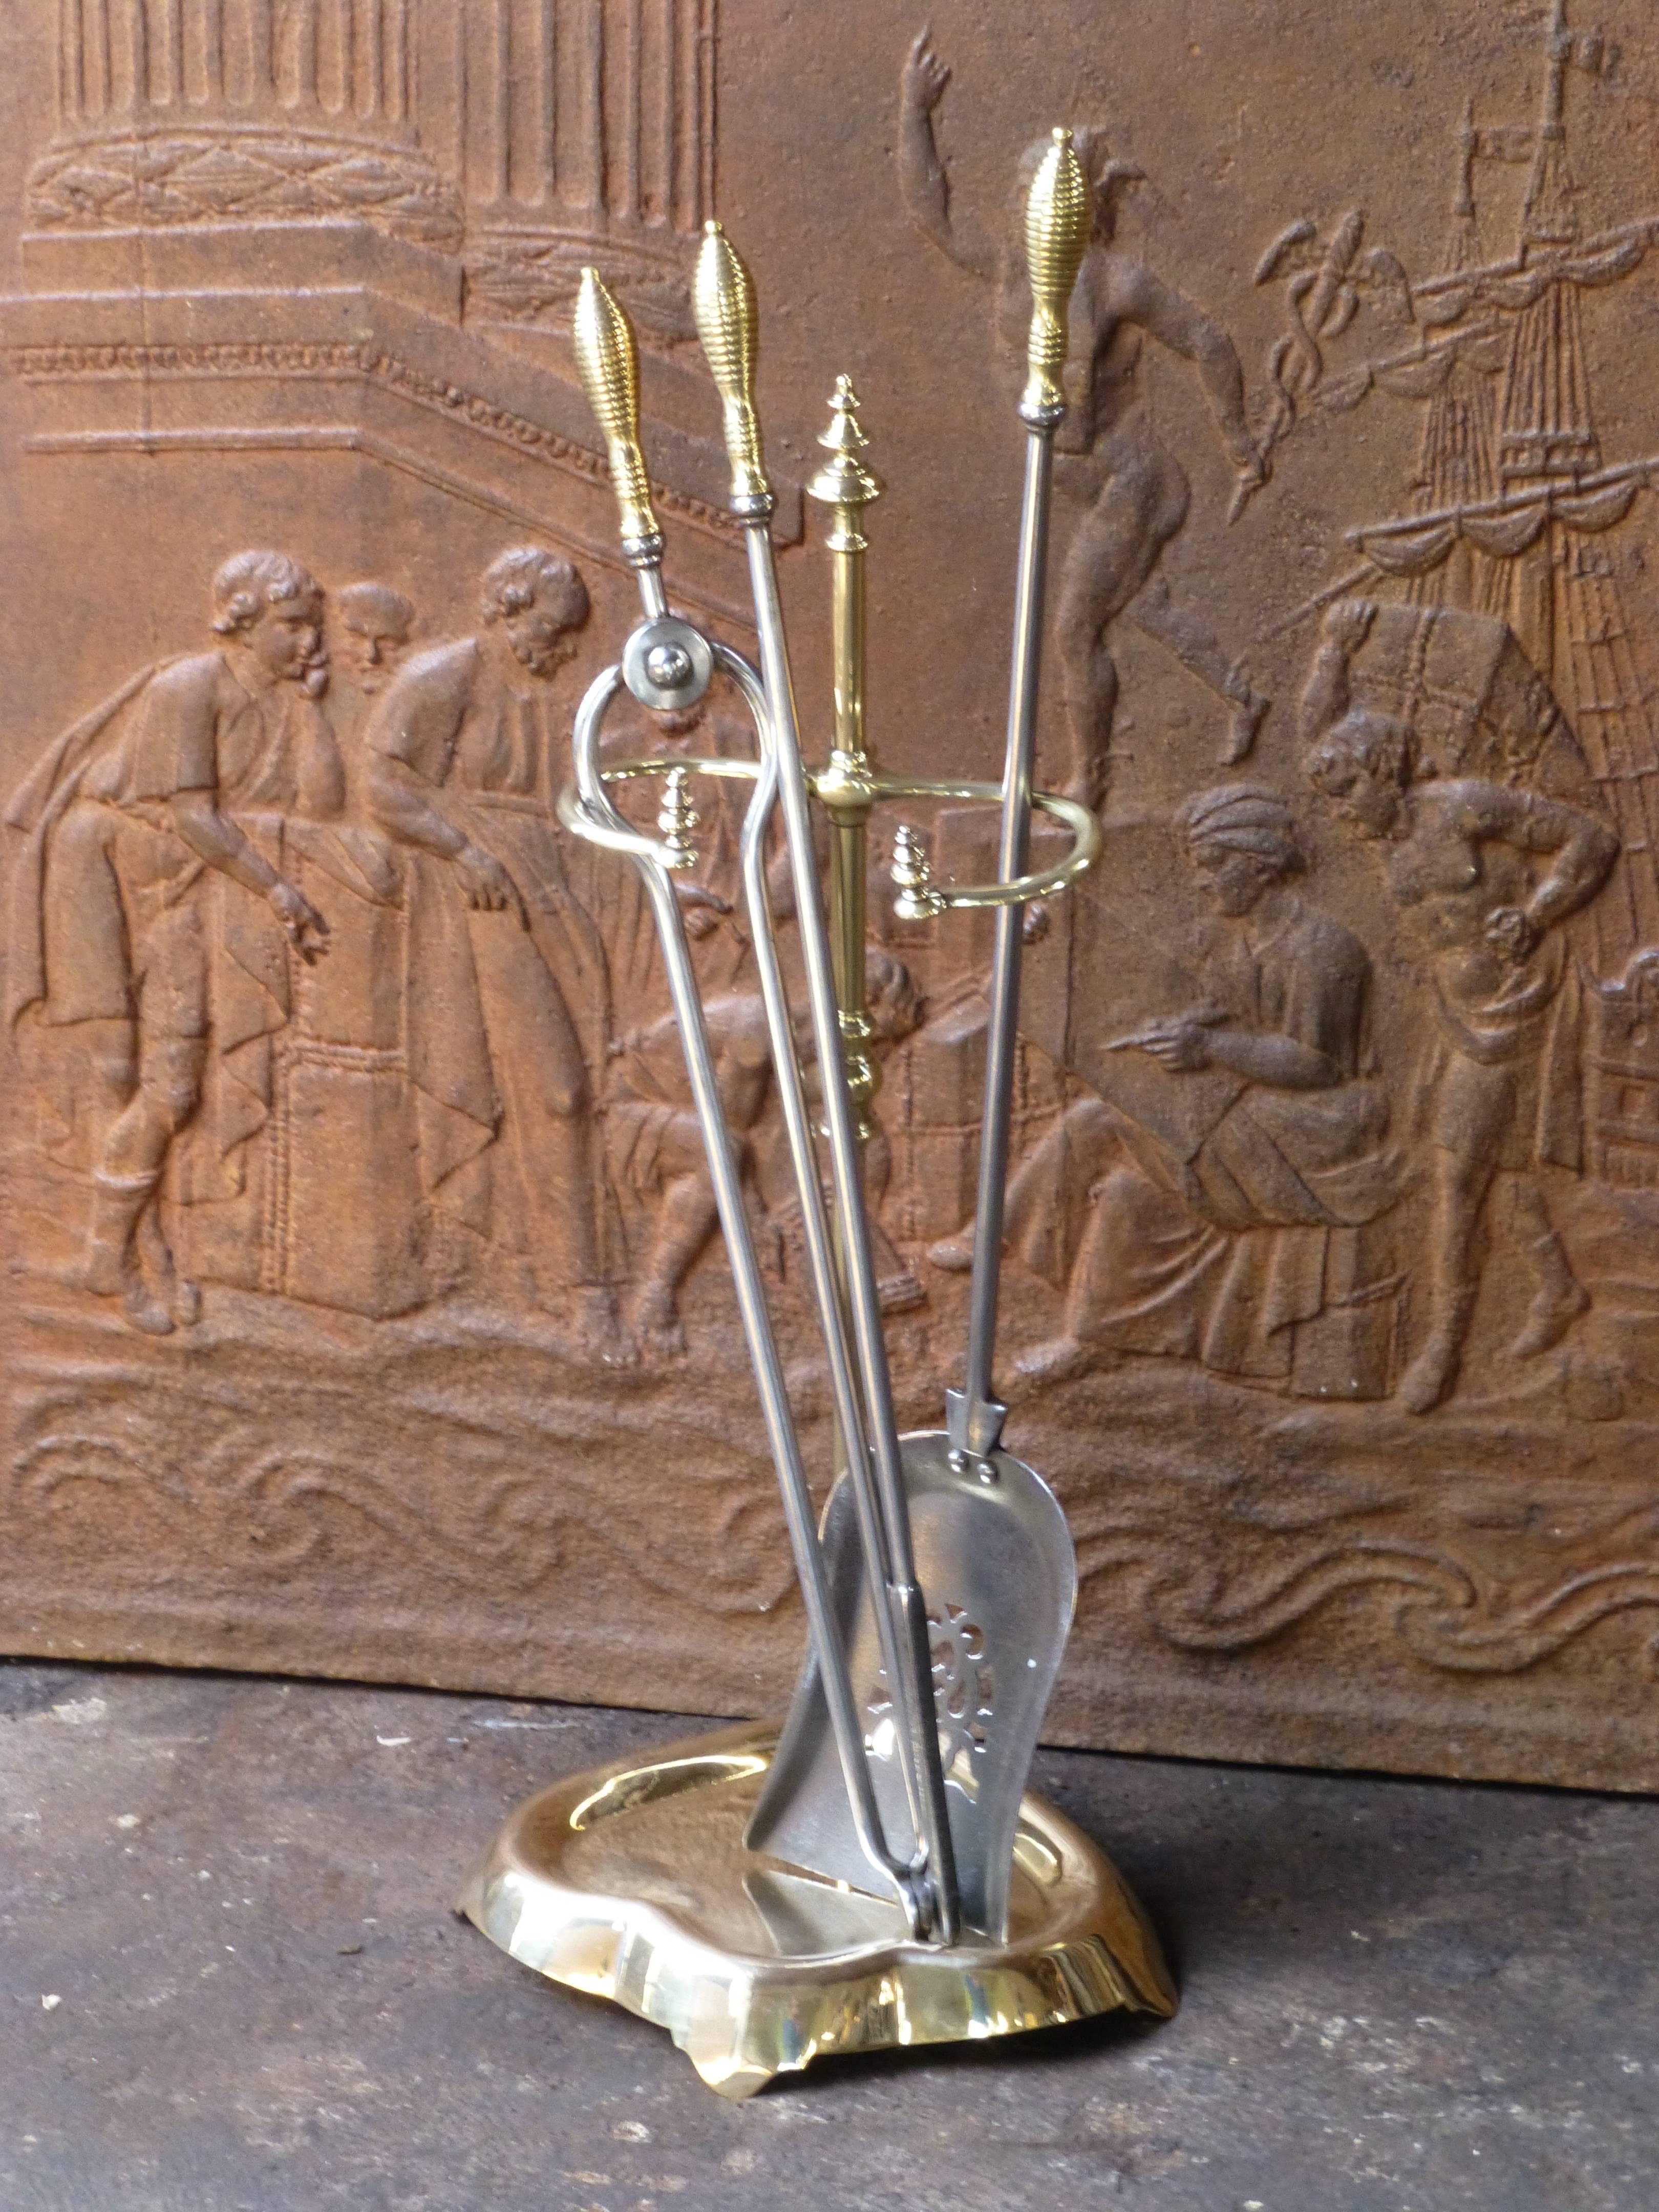 19th century polished brass and steel fire tool set and stand.

We have a unique and specialized collection of antique and used fireplace accessories consisting of more than 1000 listings at 1stdibs. Amongst others, we always have 500+ firebacks,